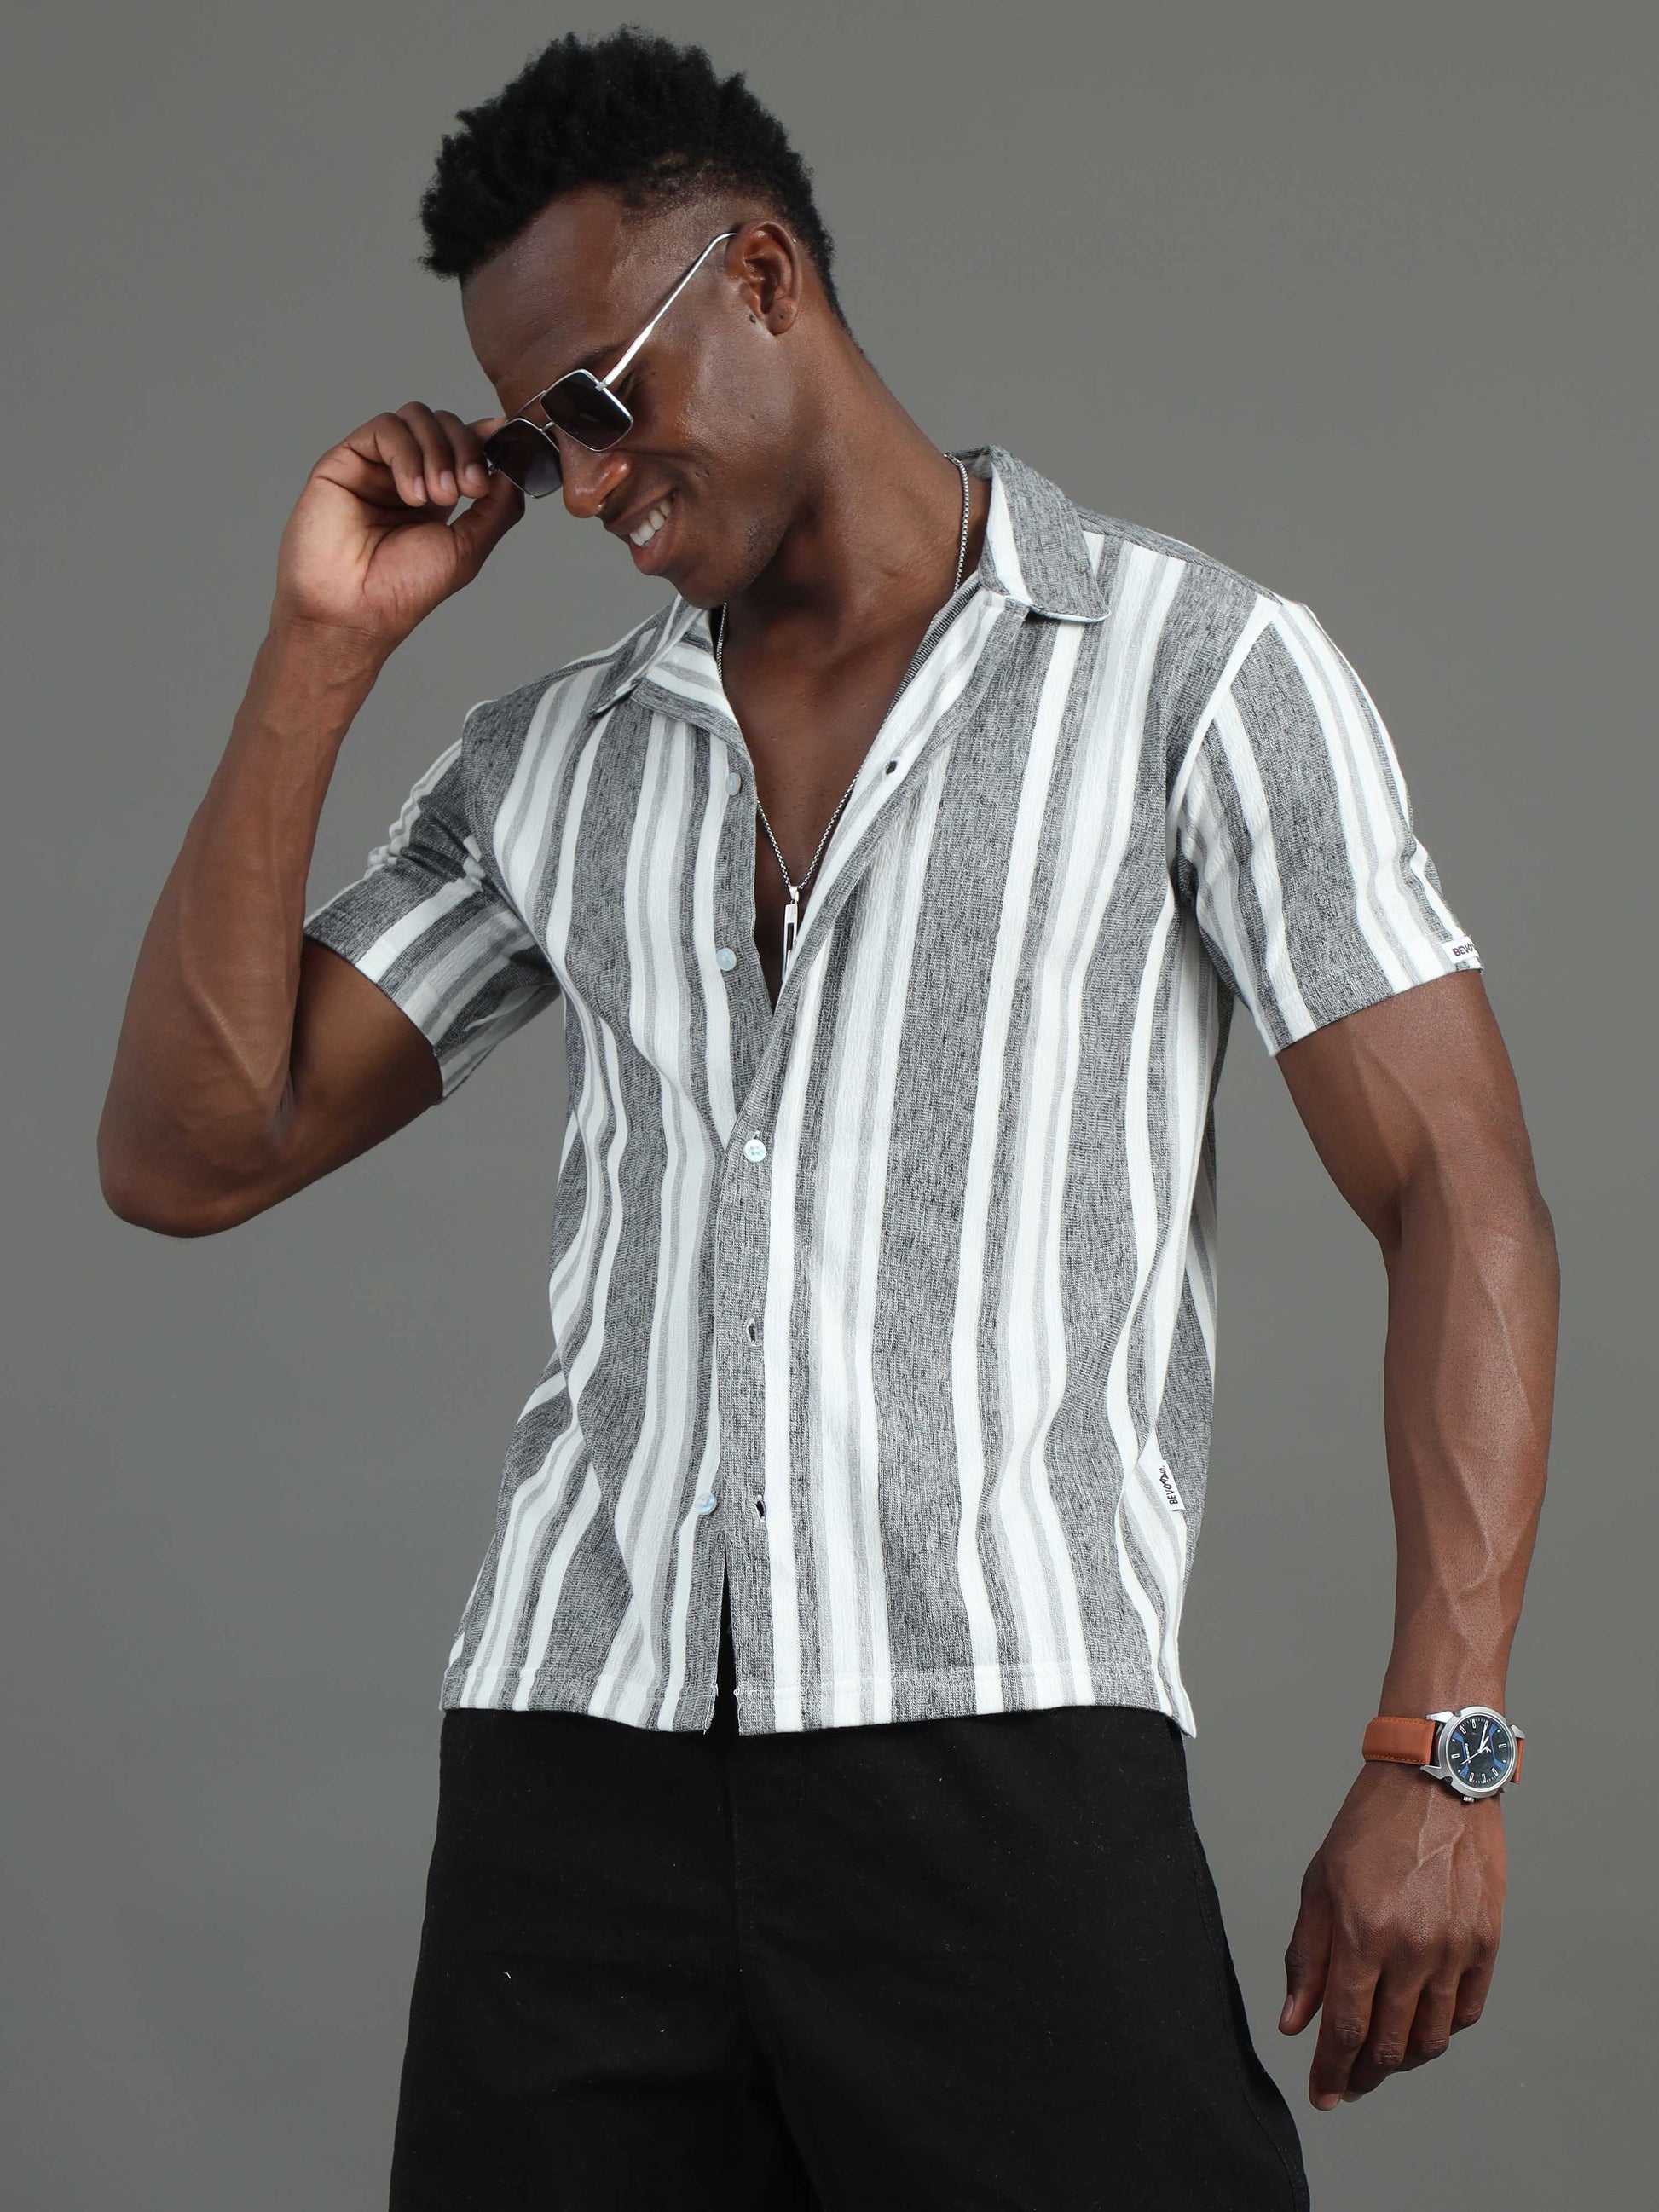 half sleeve grey and white striped shirt for men